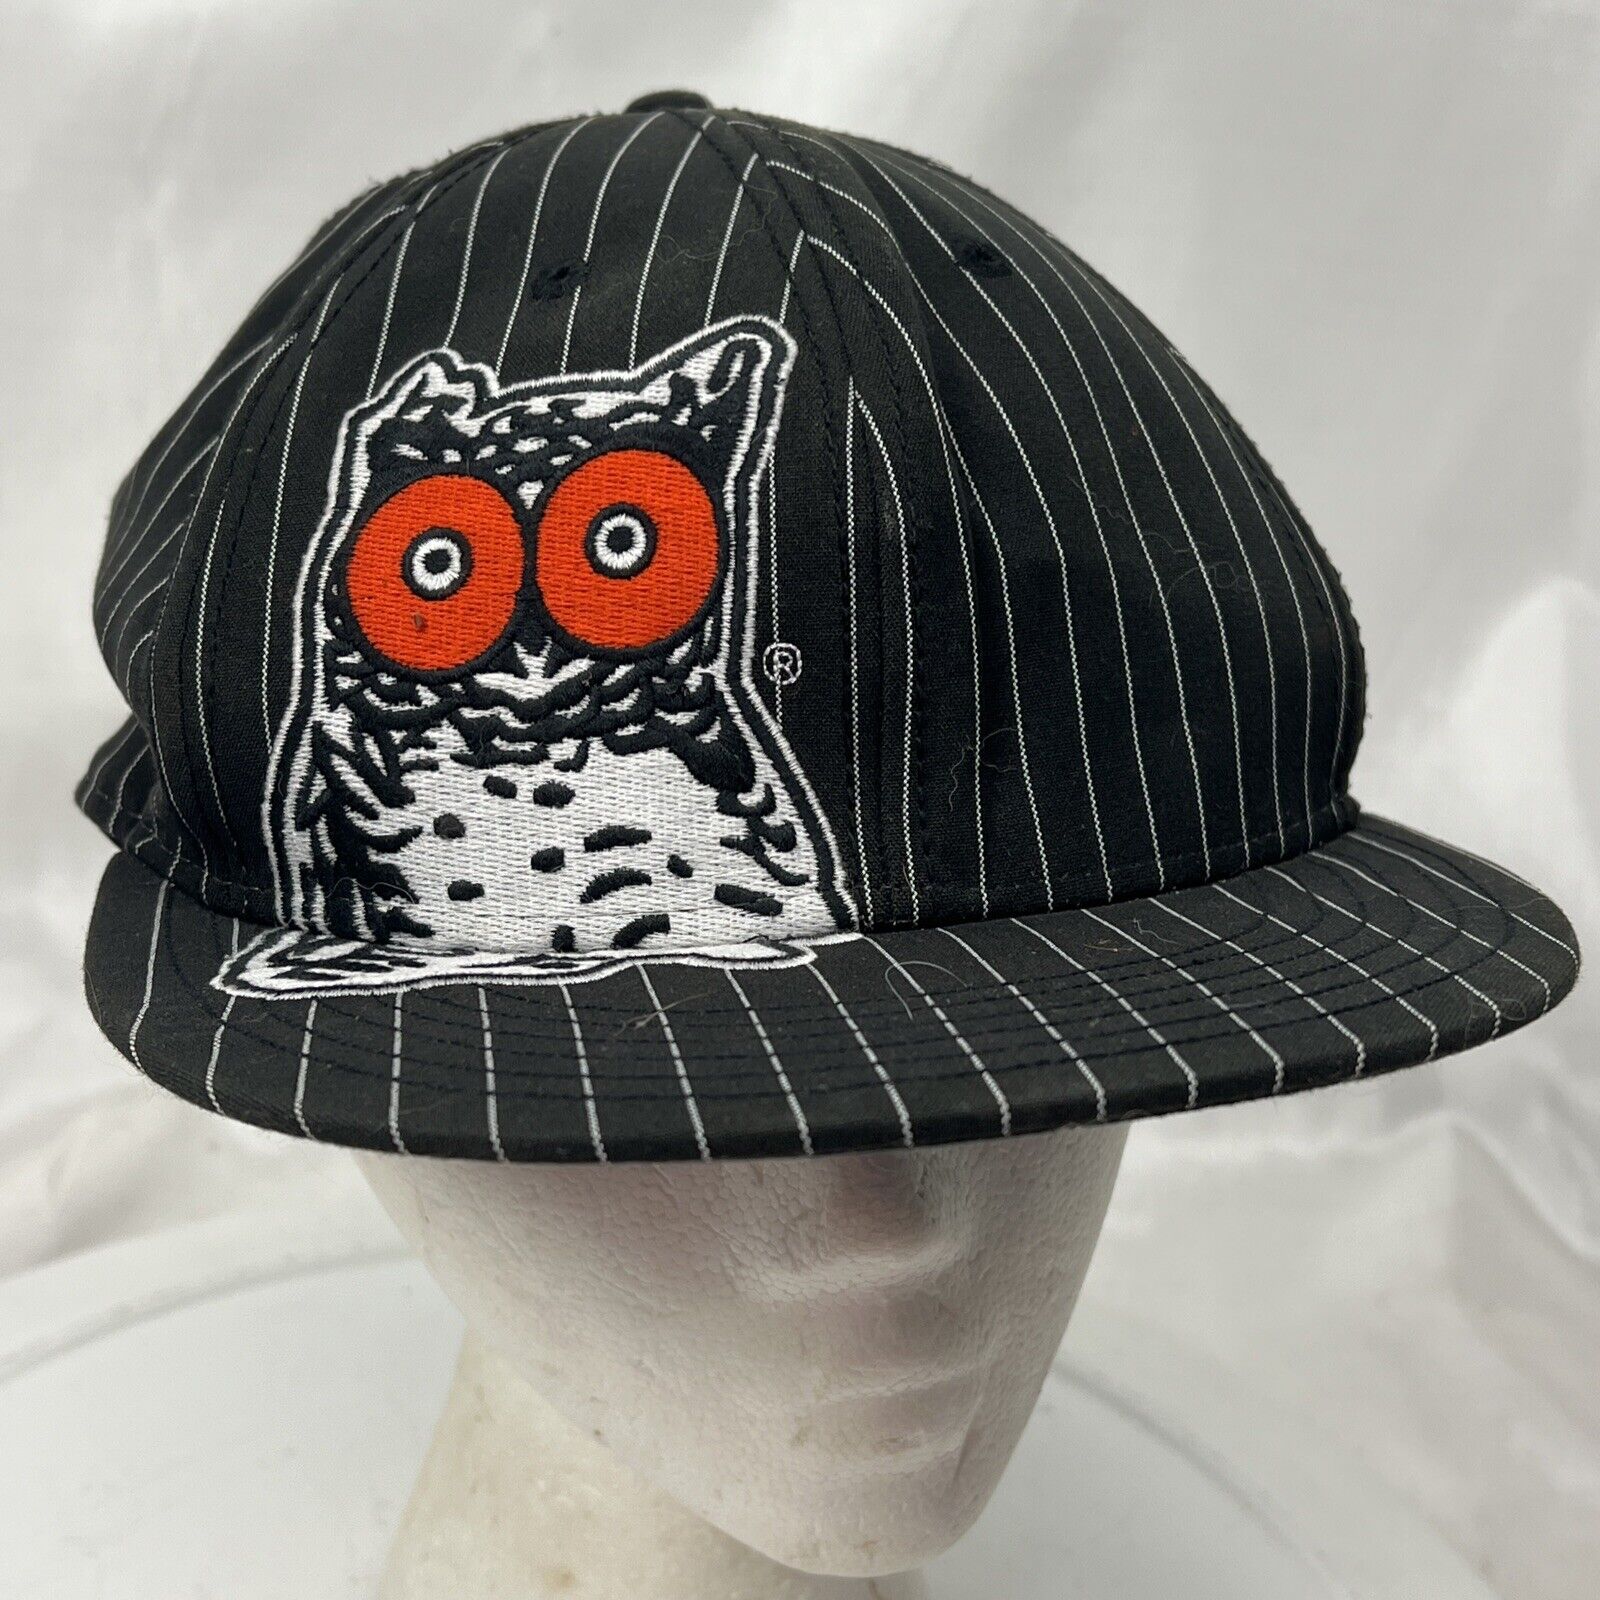 Hooters Super Sports Cap Hat - Black Pin Stripe - One Size Adjustable